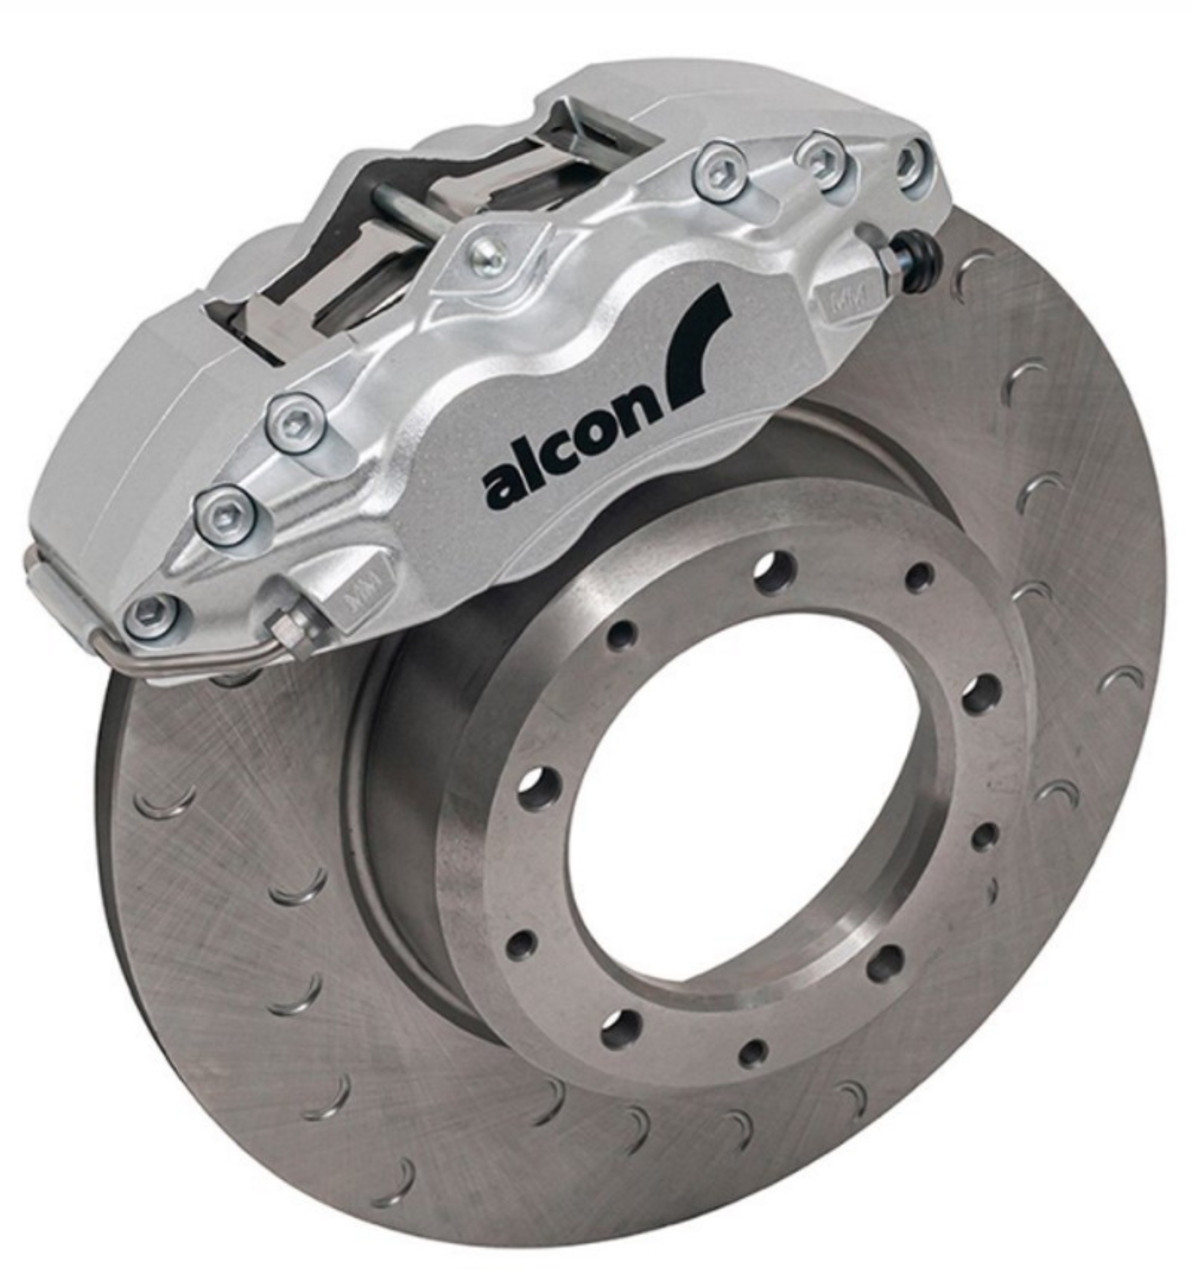 Alcon Defender 16 Inch 4 Pot Rear Brake Kit Upgrade Kit With Silver Calipers